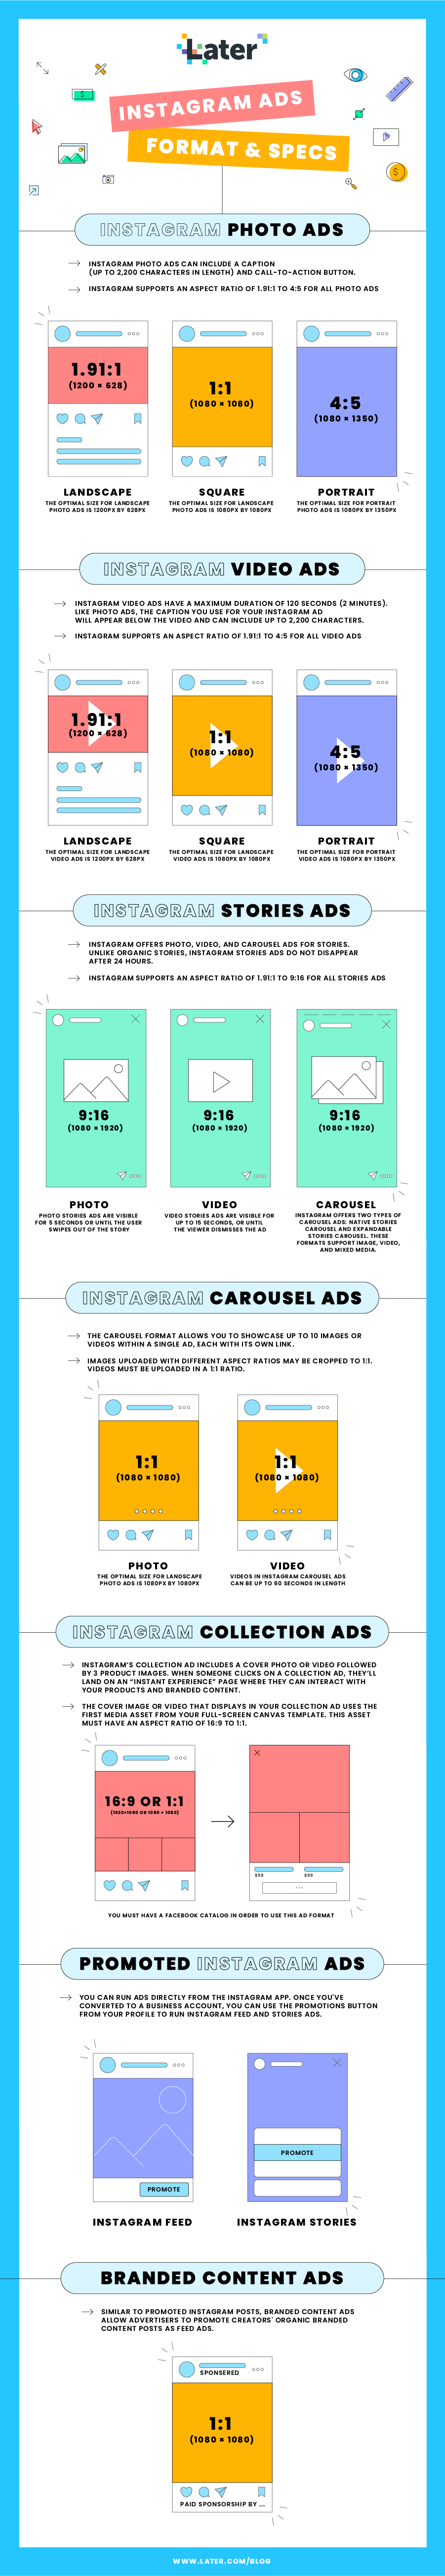 Advertising-Infographics-The-Ultimate-Guide-to-Instagram-Advertising Advertising Infographics : The Ultimate Guide to Instagram Advertising (+ Free Infographic!) - Later Blog